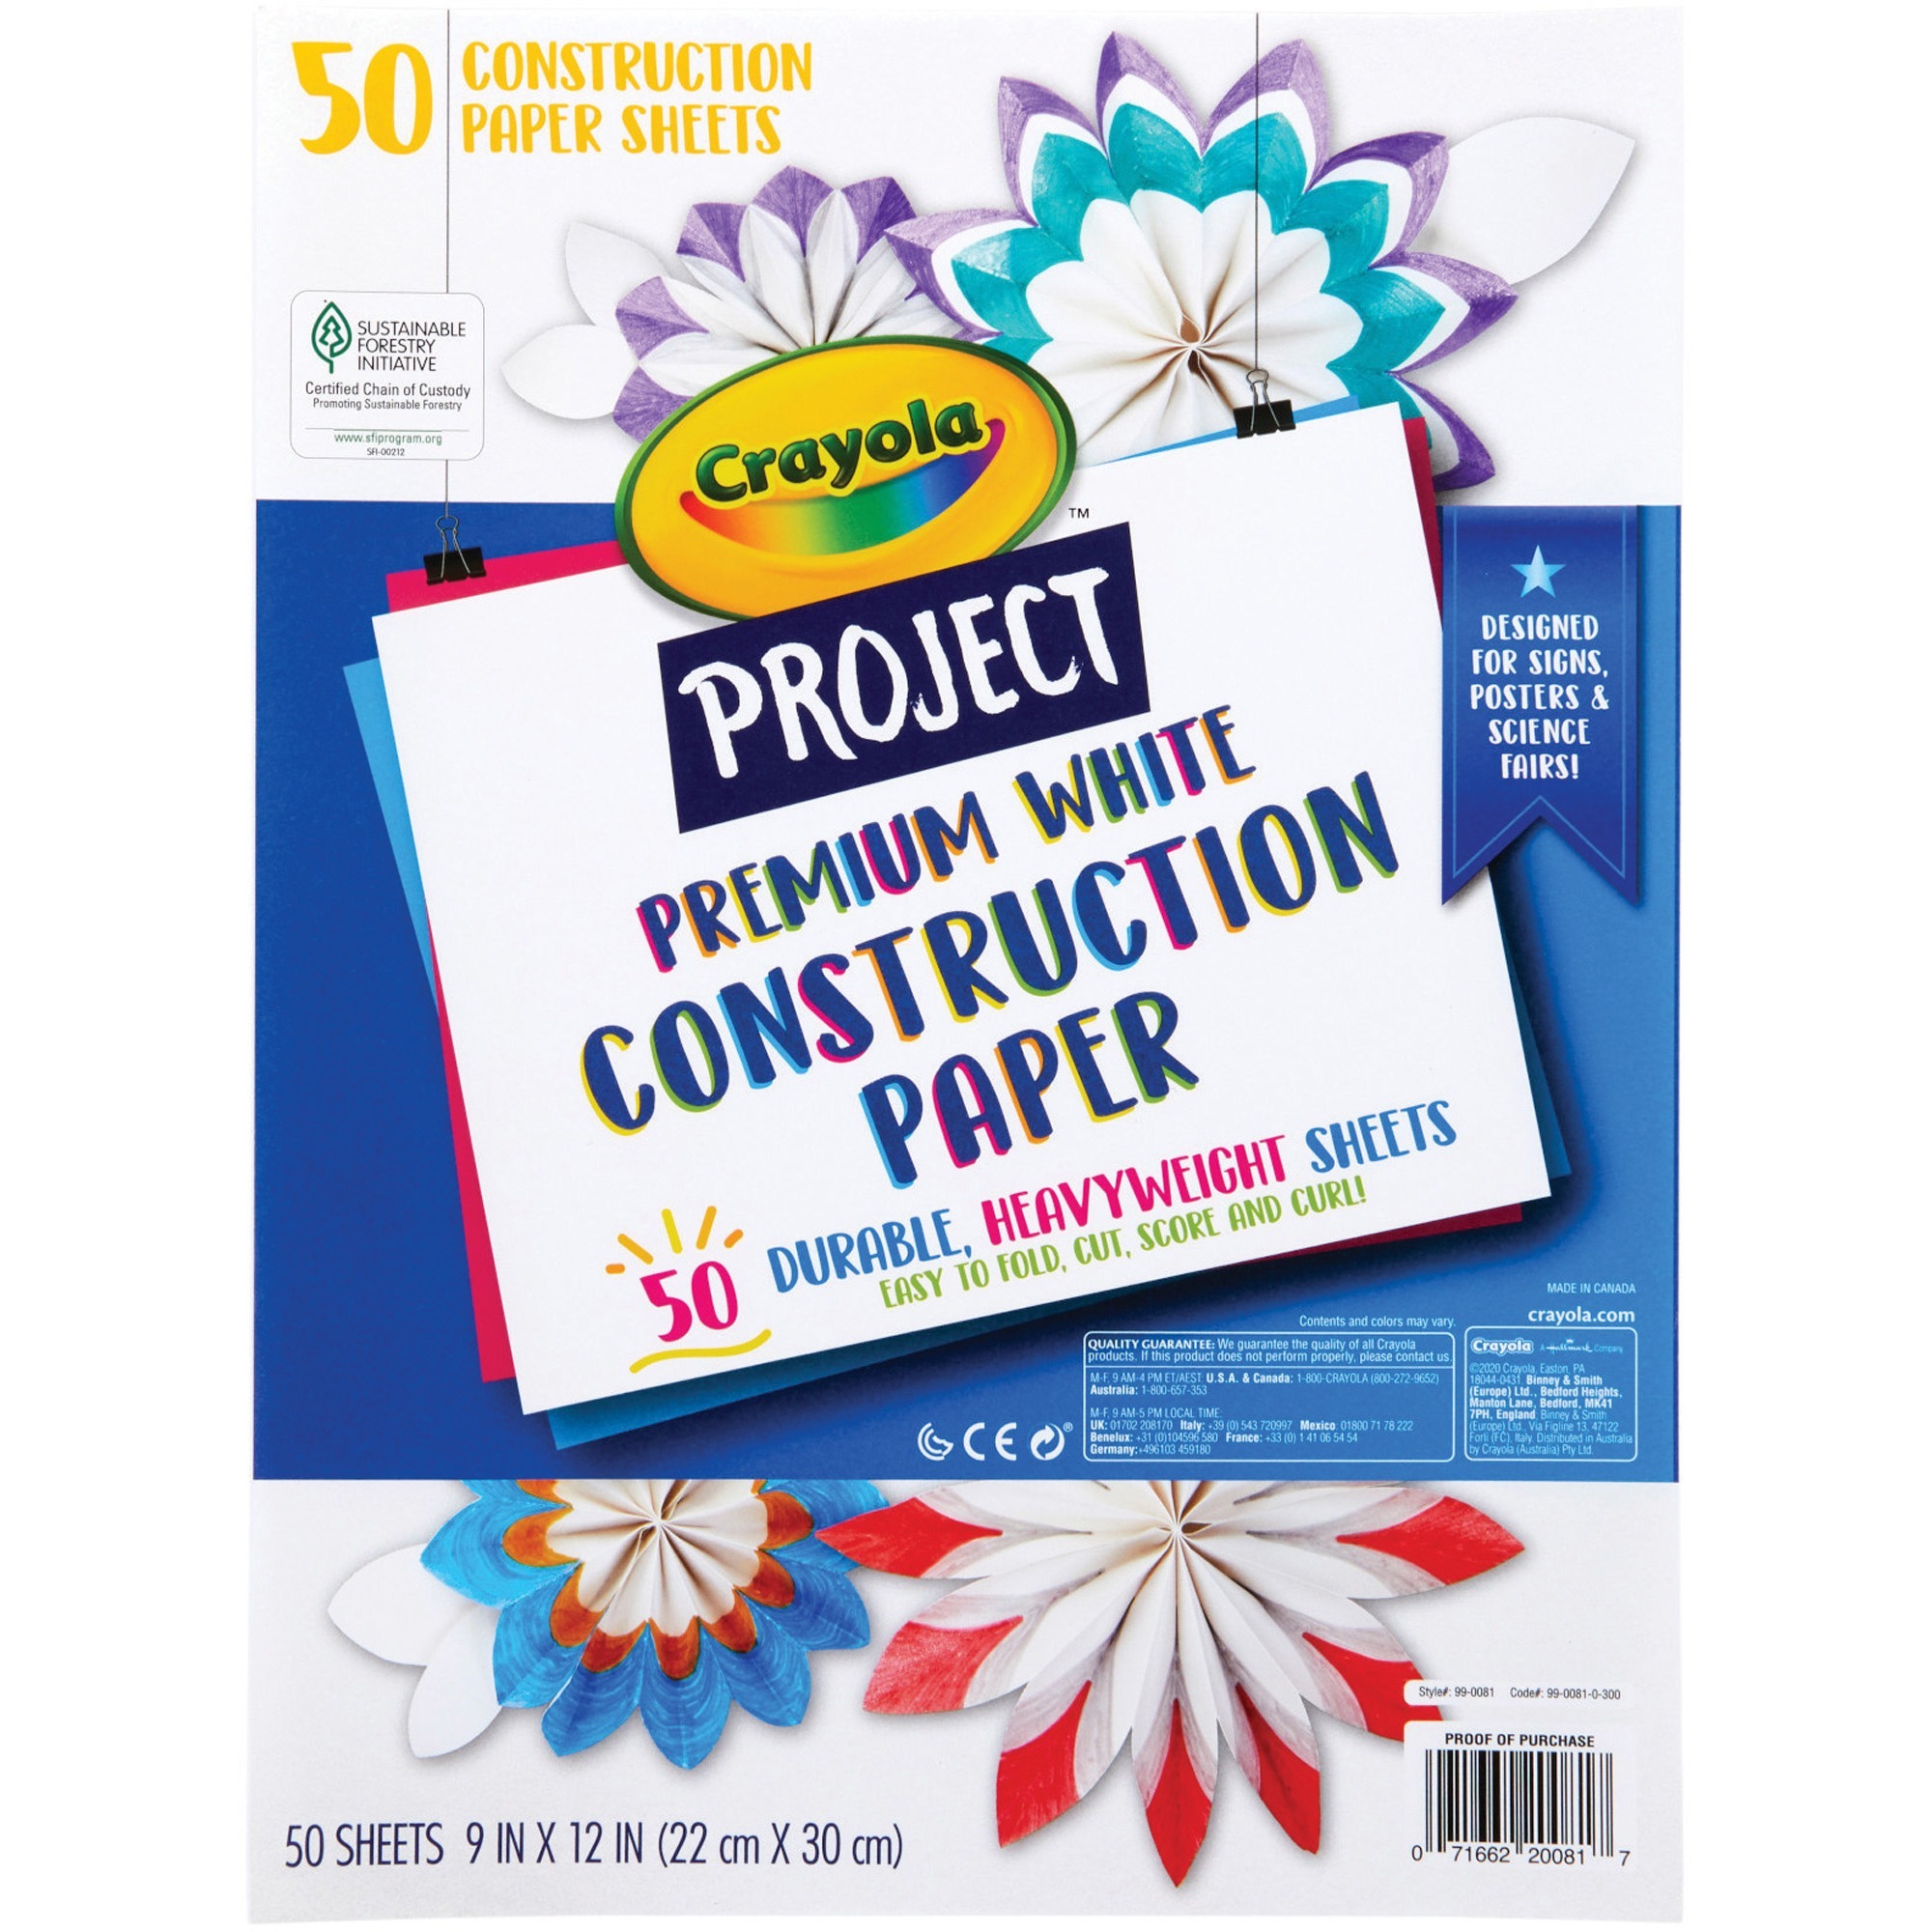 All-purpose Construction Paper by Sparco Products SPR22302